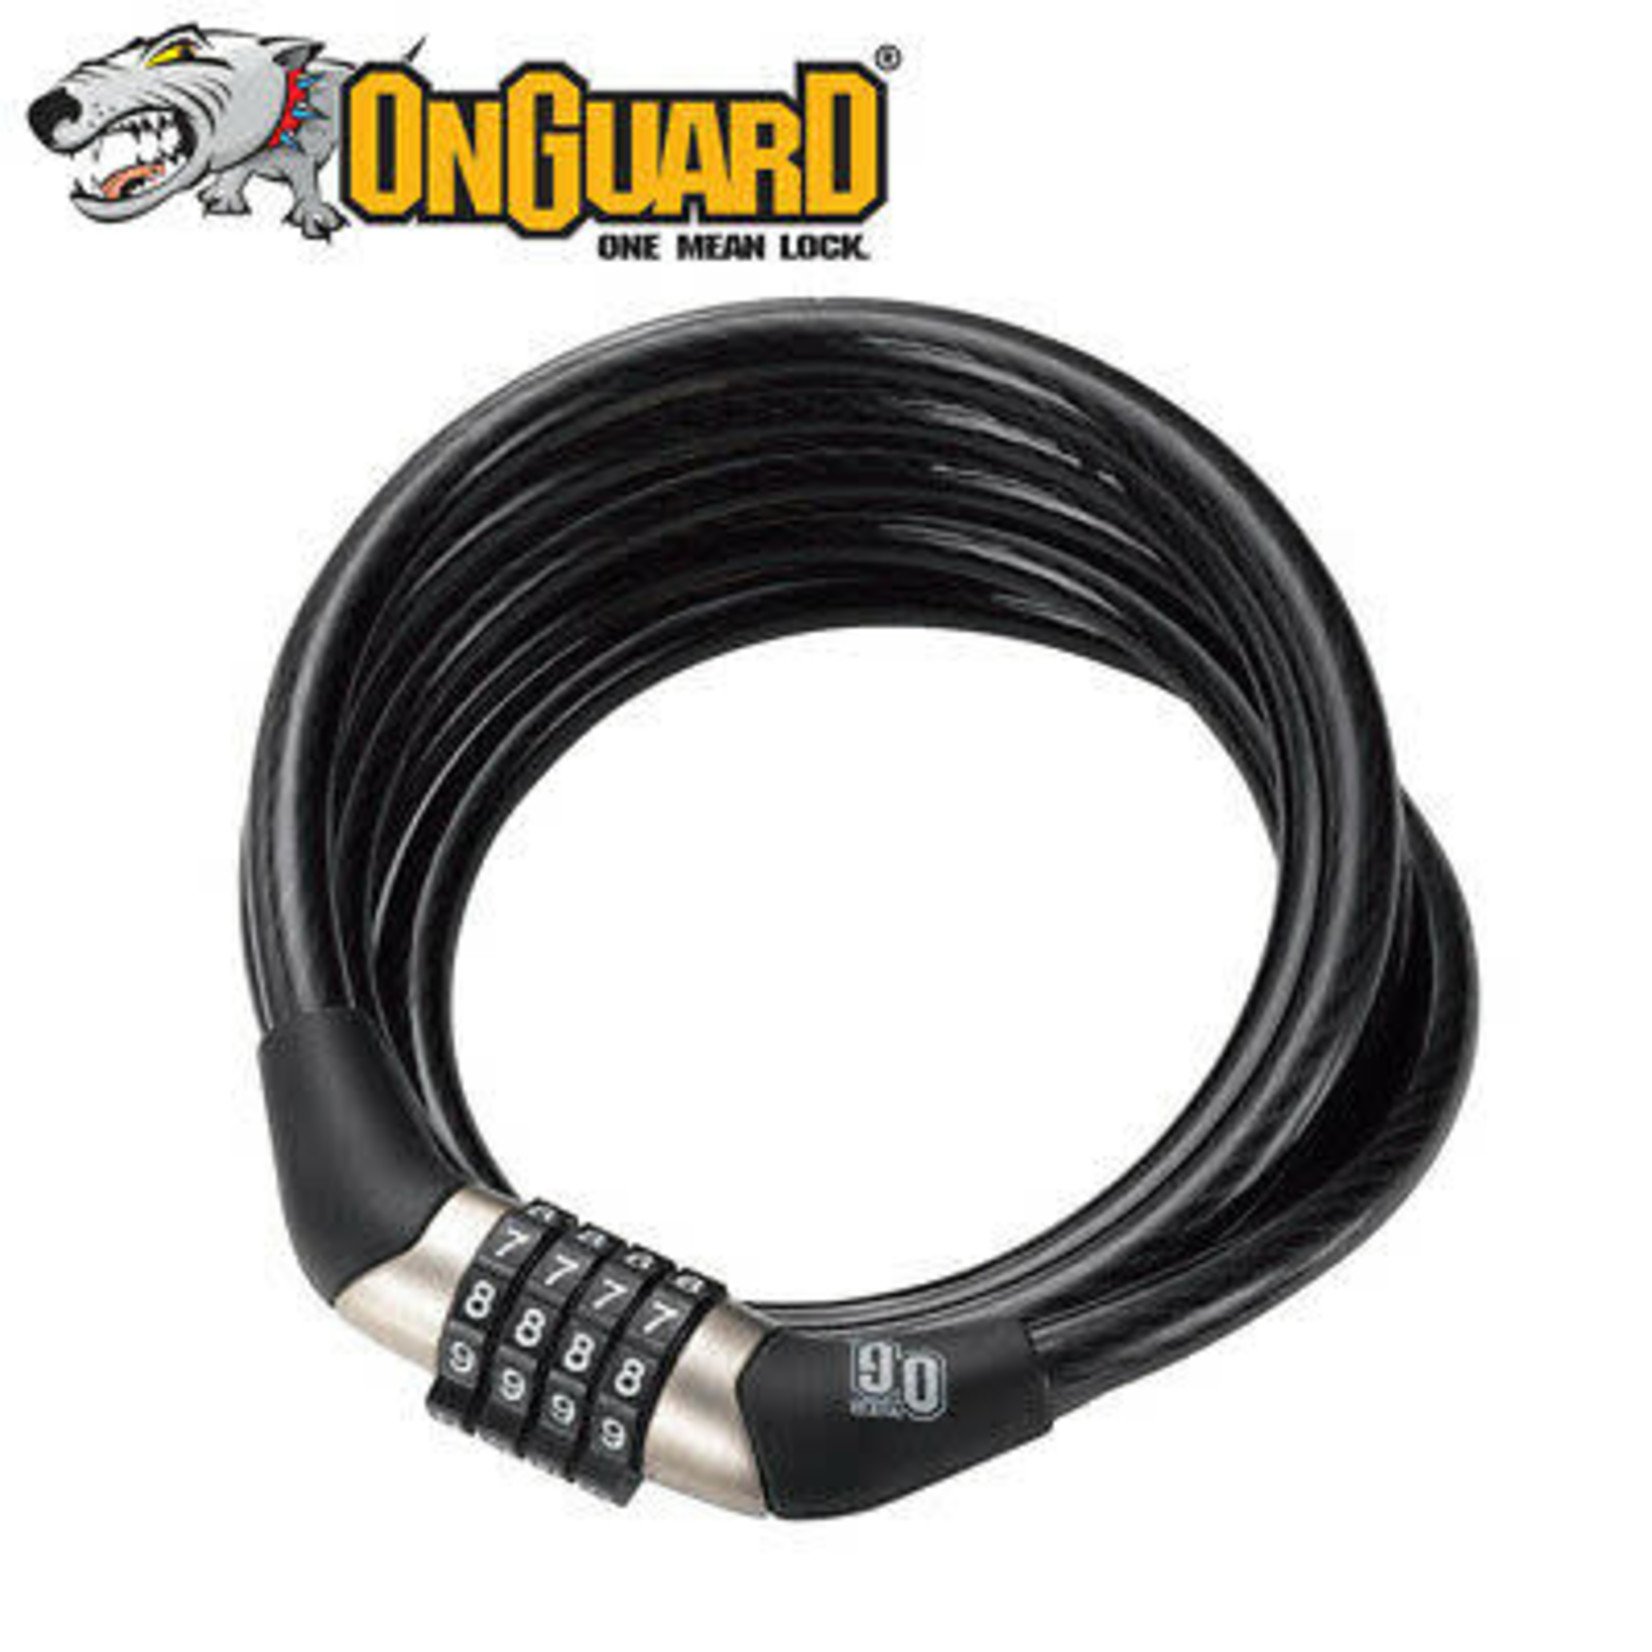 Onguard OnGuard, G 5817, Cil cable with cmbinatin lck, 8mm x 150cm (8mm x 4.9')